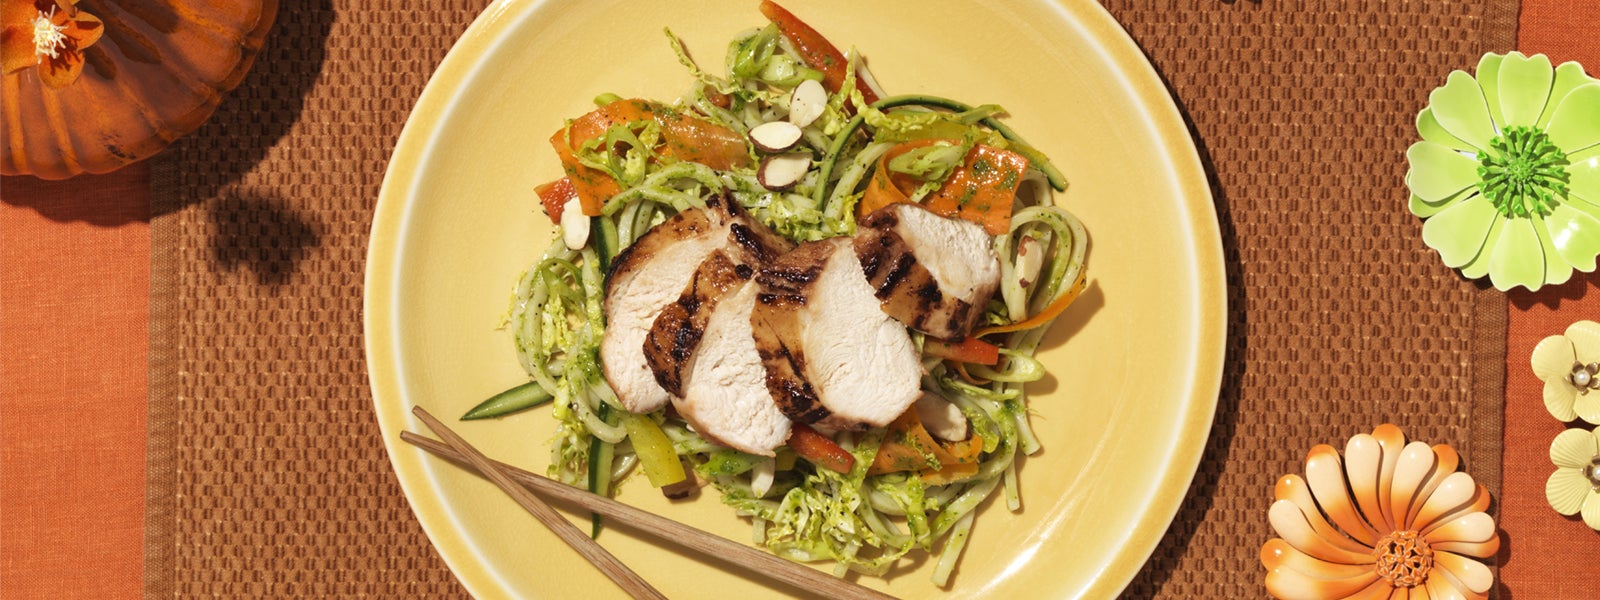 Udon Noodle Salad with Grilled Chicken Teriyaki | Soy Vay®